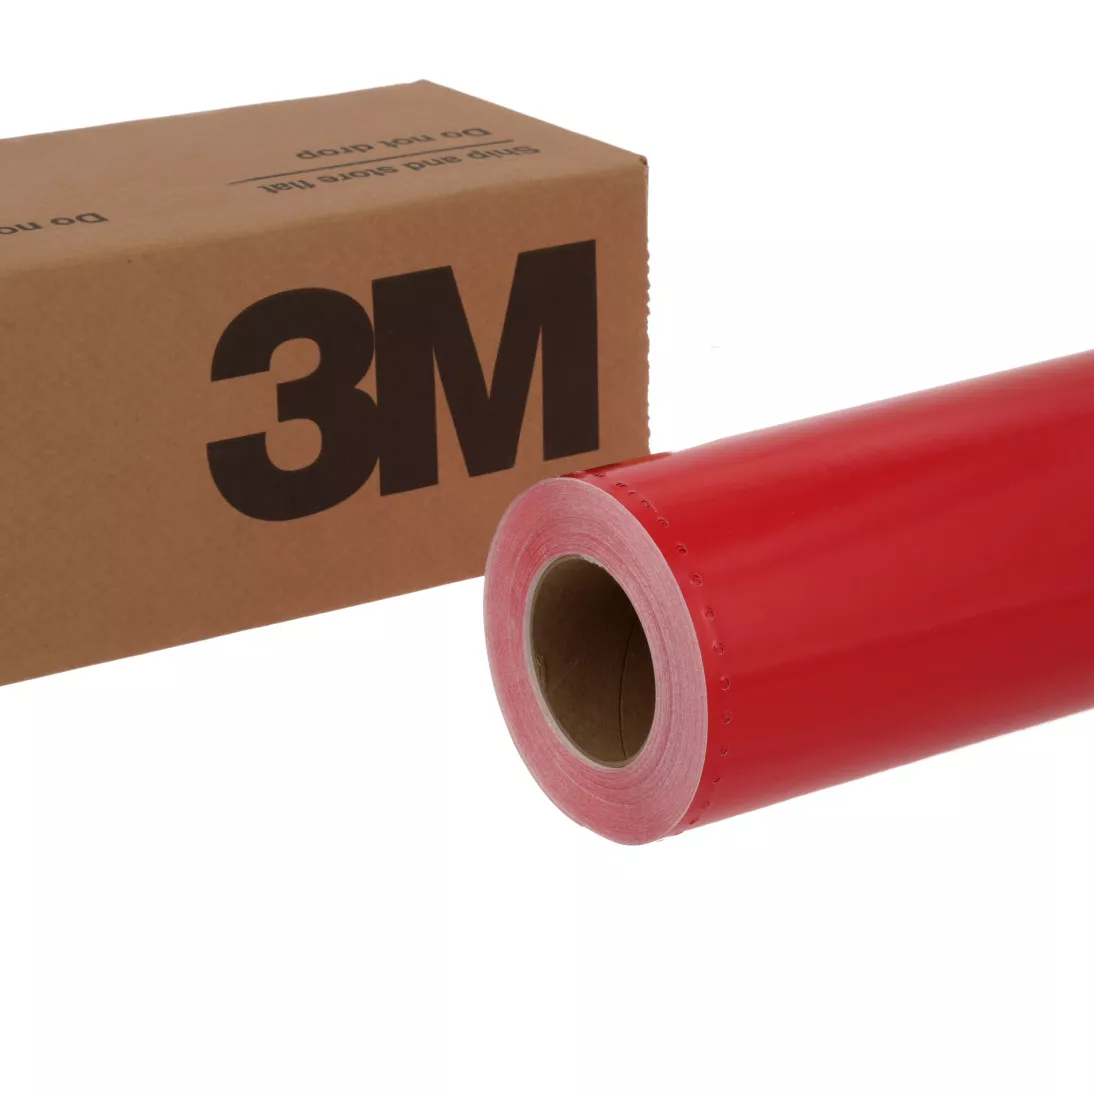 3M™ Scotchcal™ Translucent Graphic Film 3630-2361, Red, 48 in x 50 yd